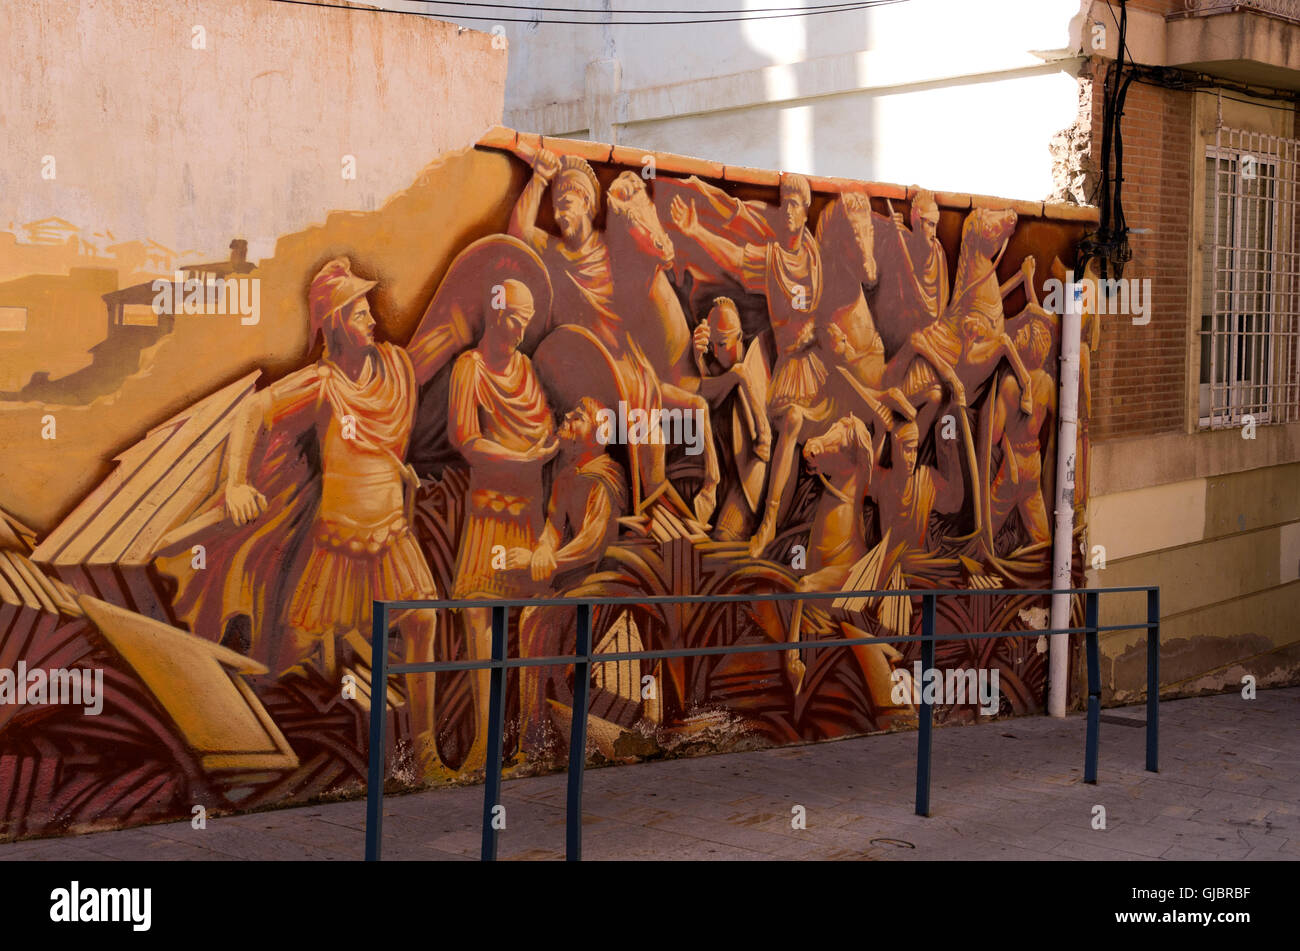 Roman gladiator mural painted on wall of building in reconstruction Stock Photo